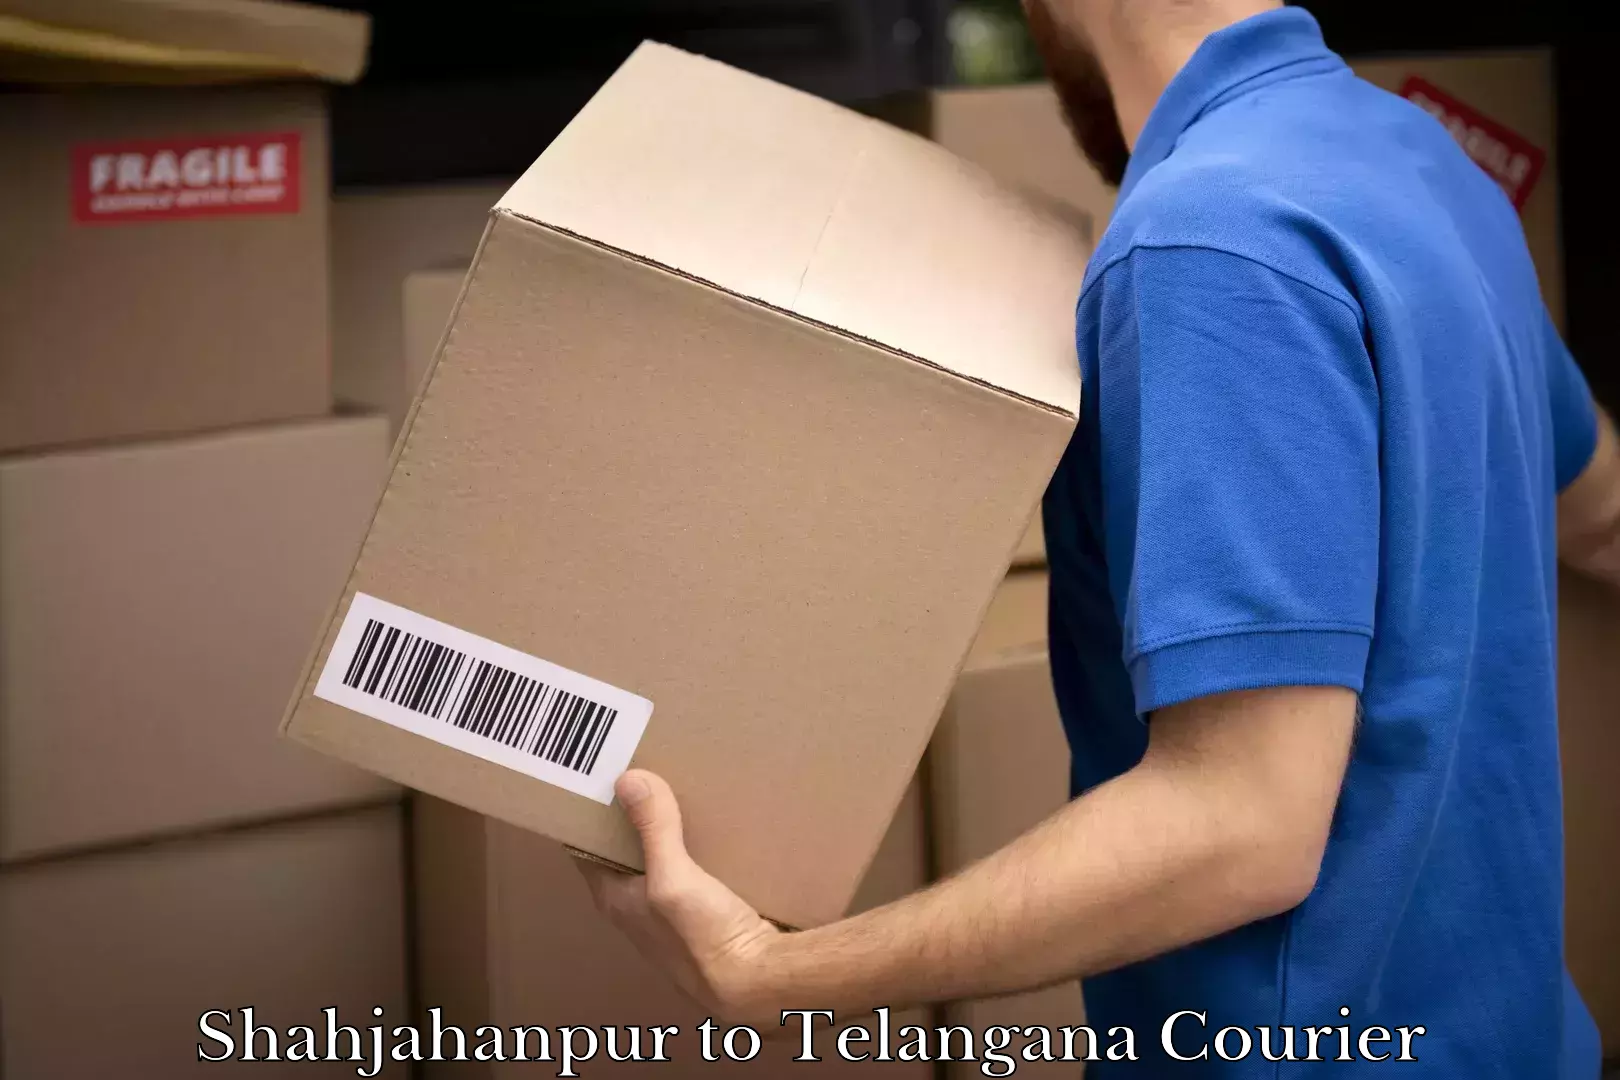 Courier service comparison Shahjahanpur to Telangana